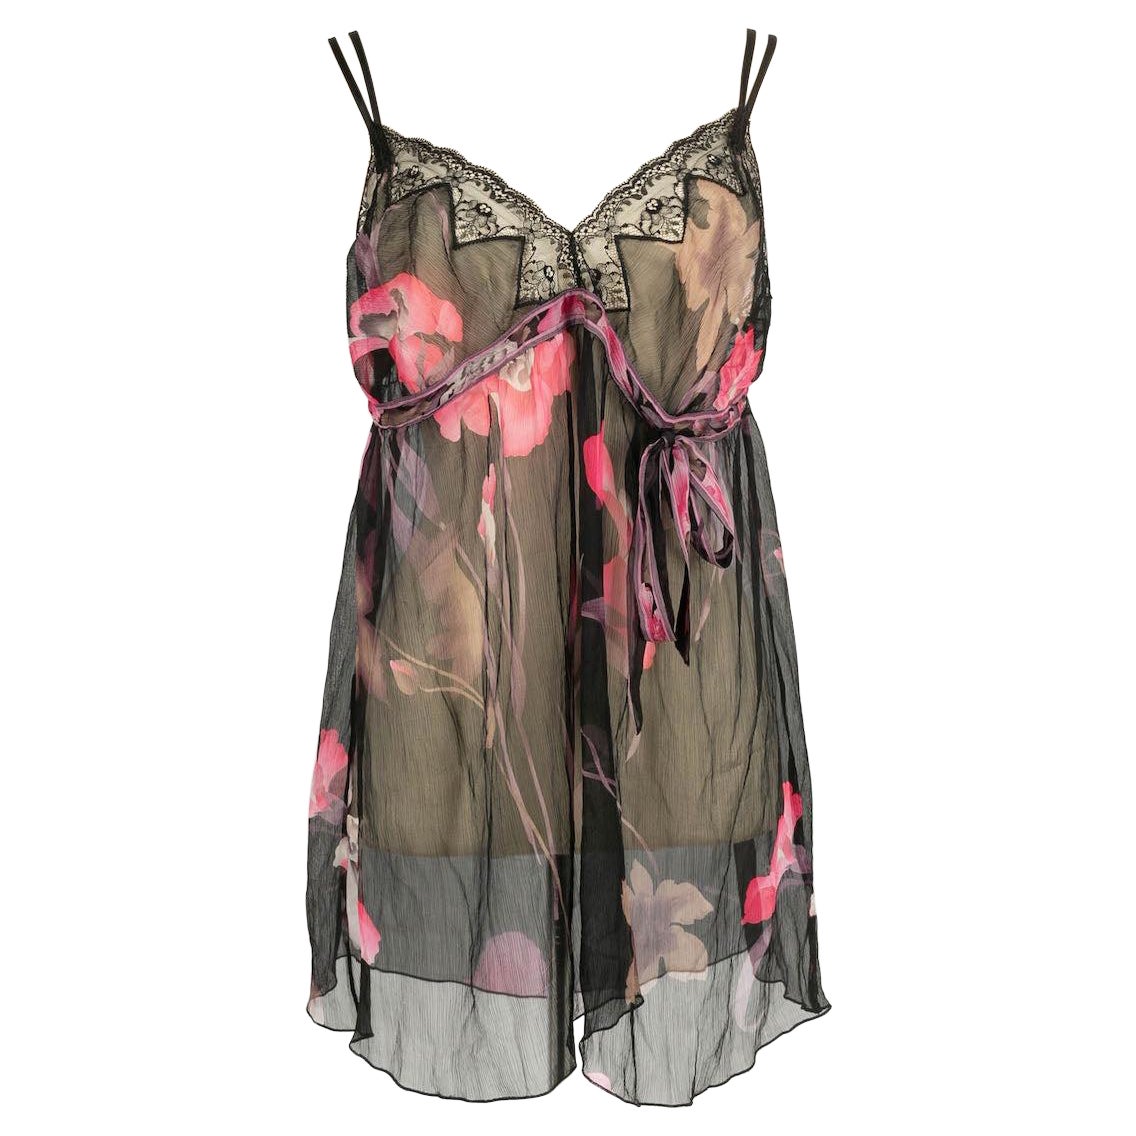 Leonard's Undress Black and Pink Silk Sheer Negligee For Sale